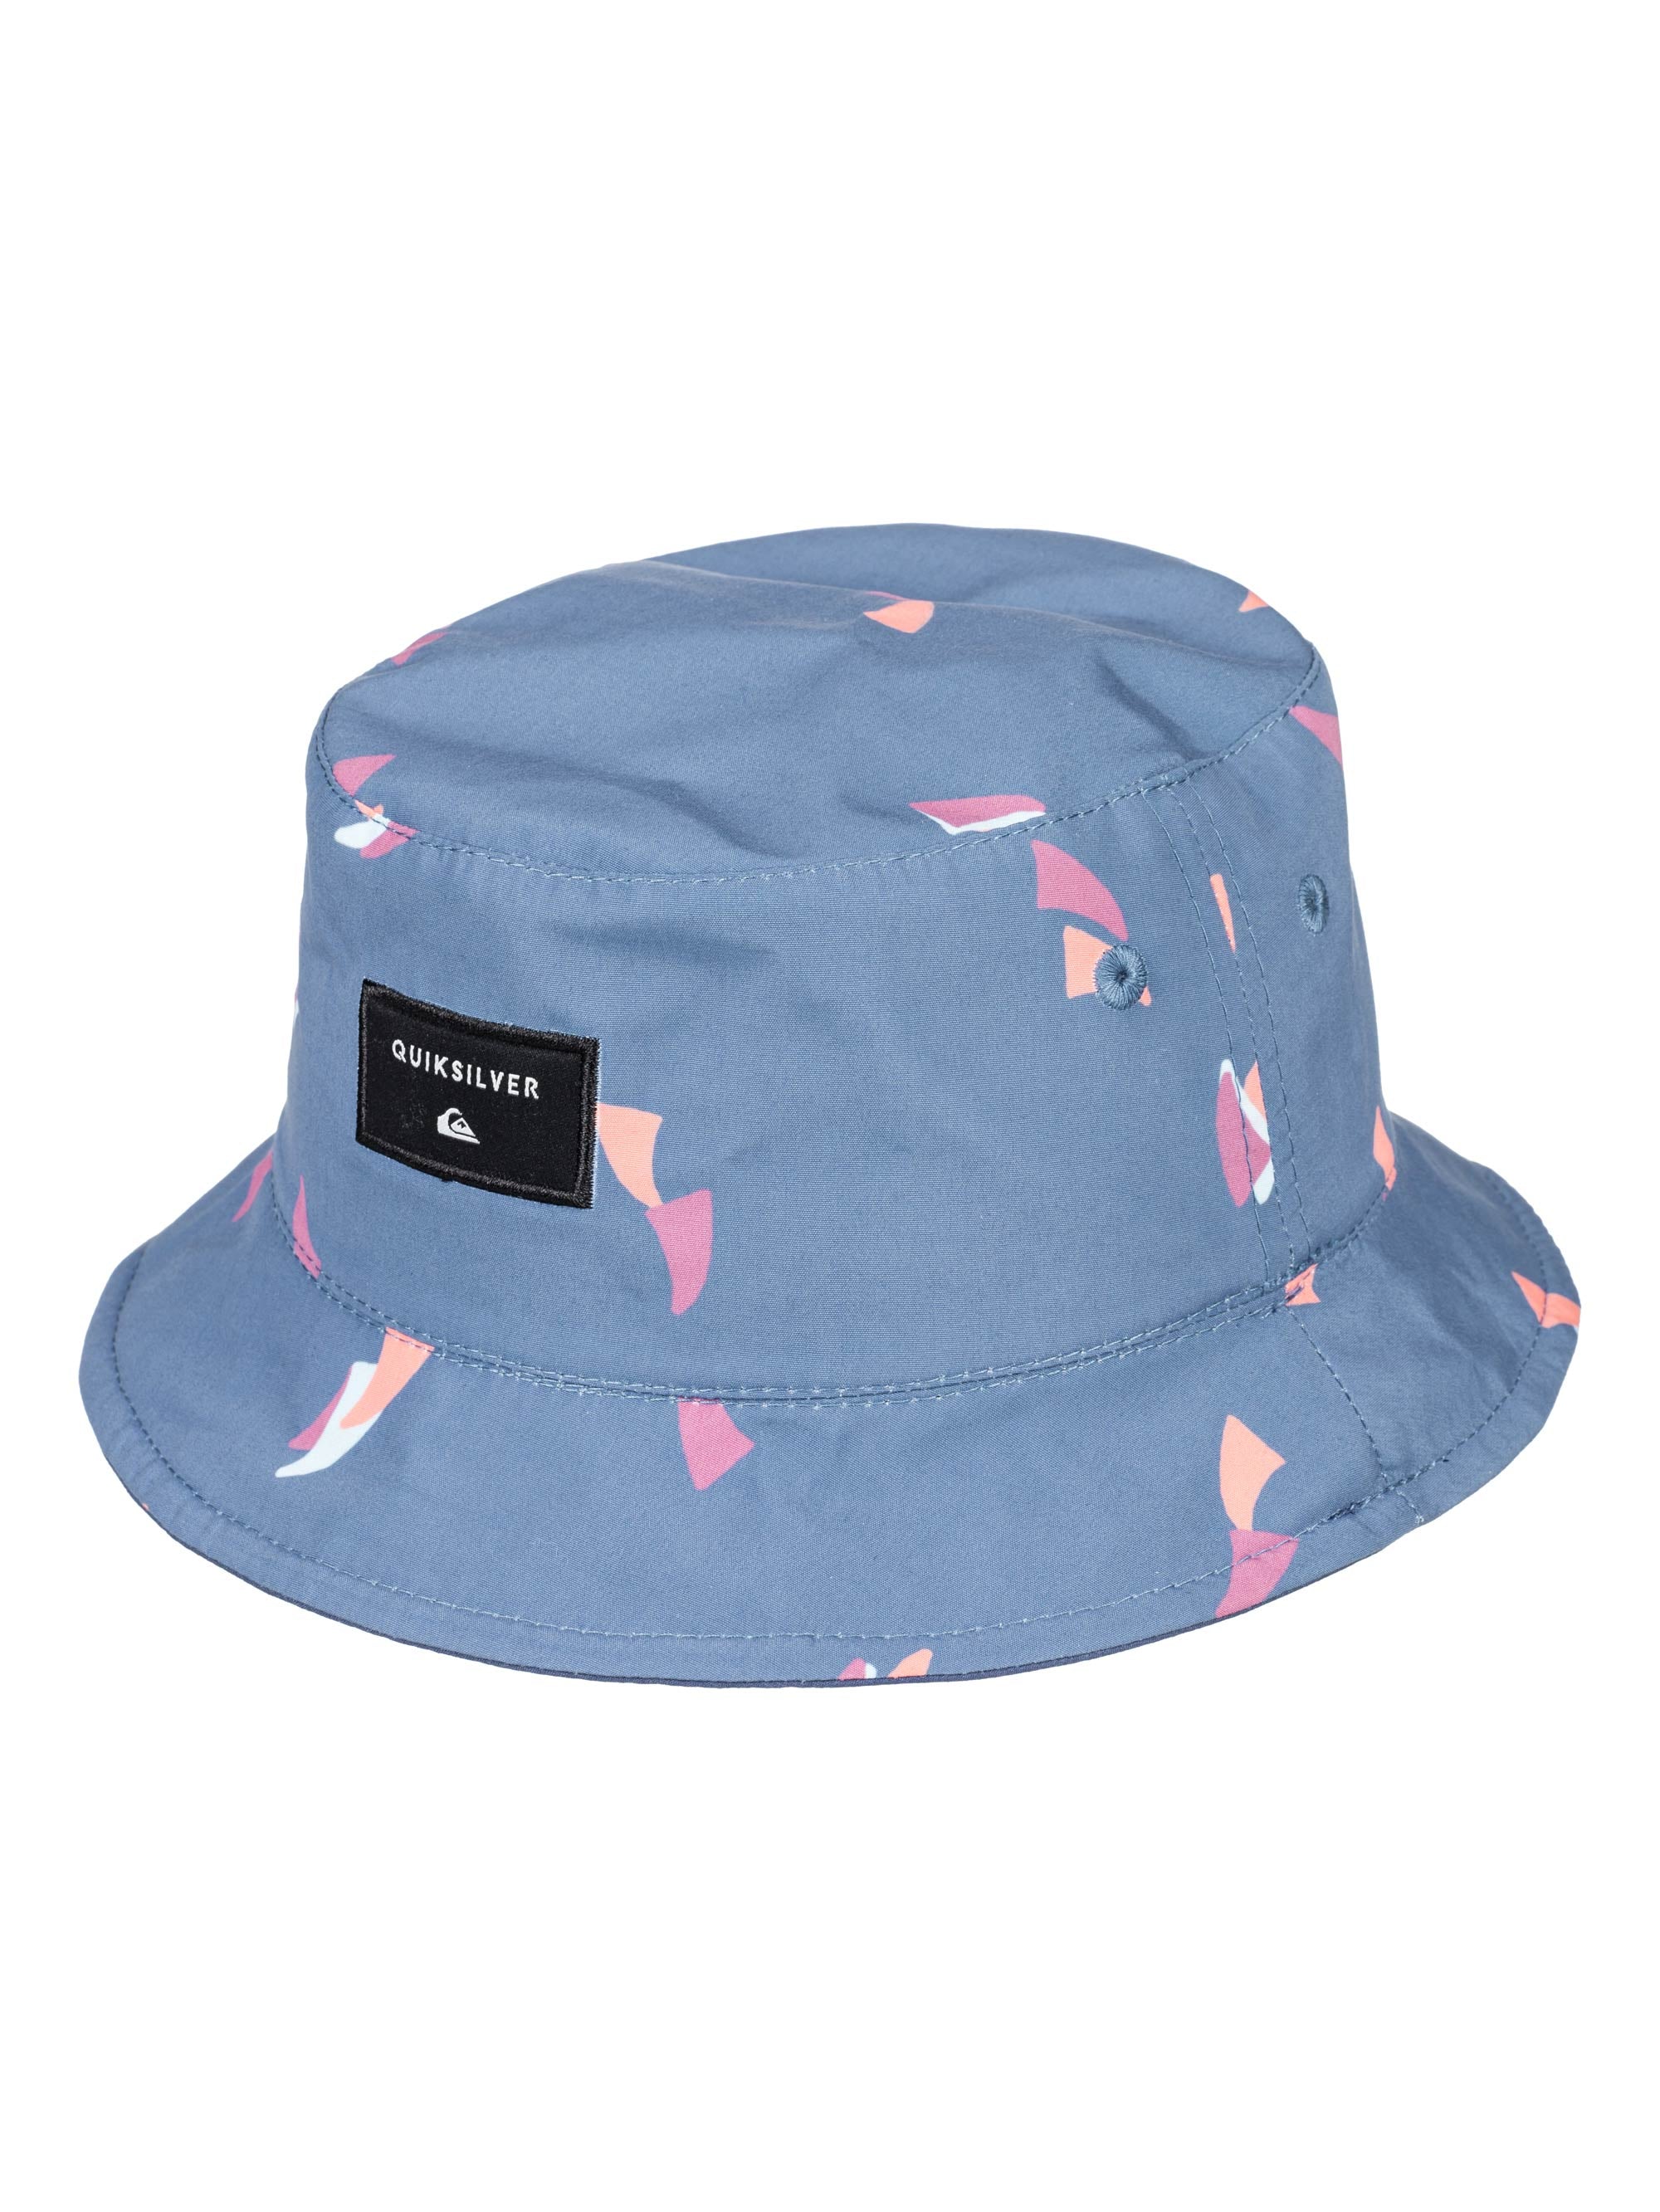 Quiksilver Chapper Boys Bucket Hat BNG0 OS